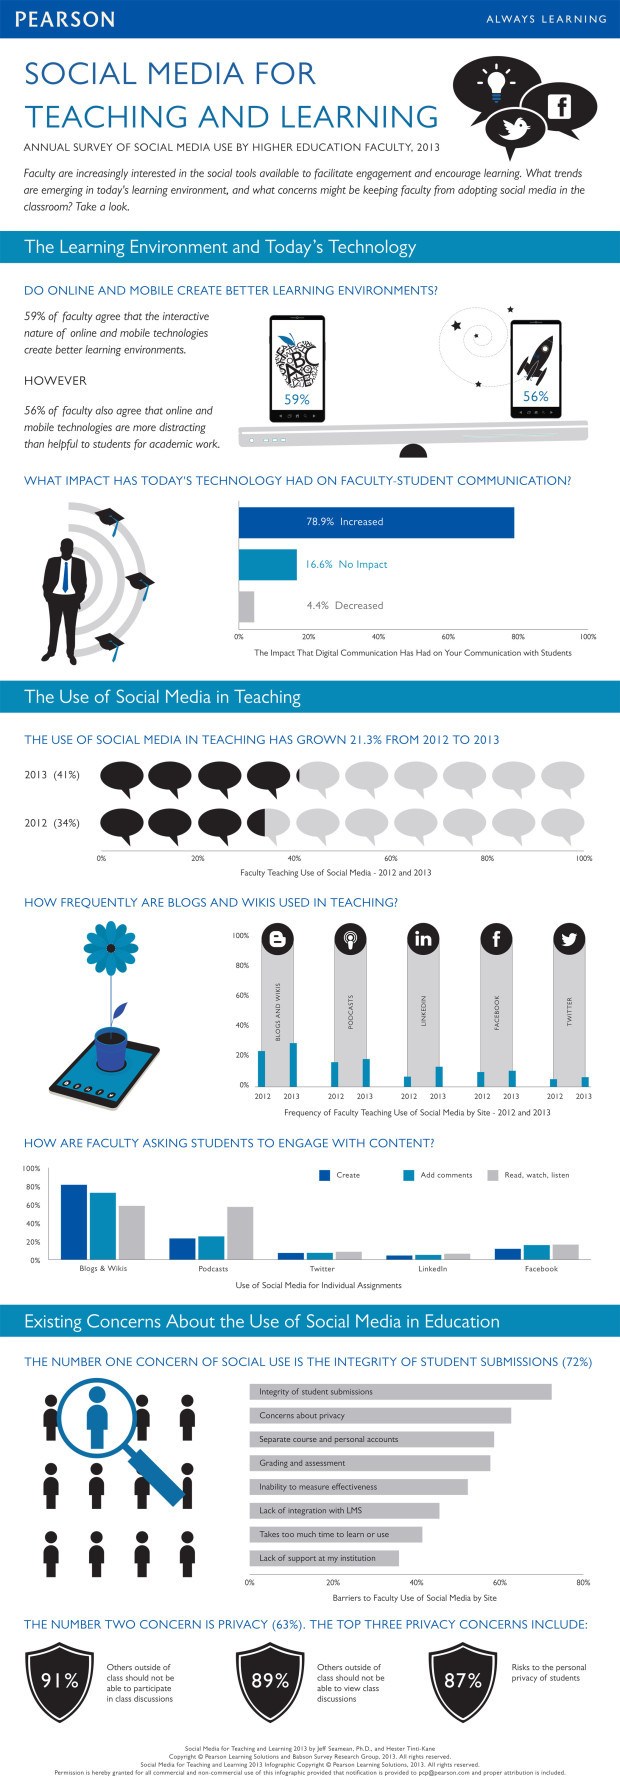 social-media-for-teaching-and-learning-2013-infographic